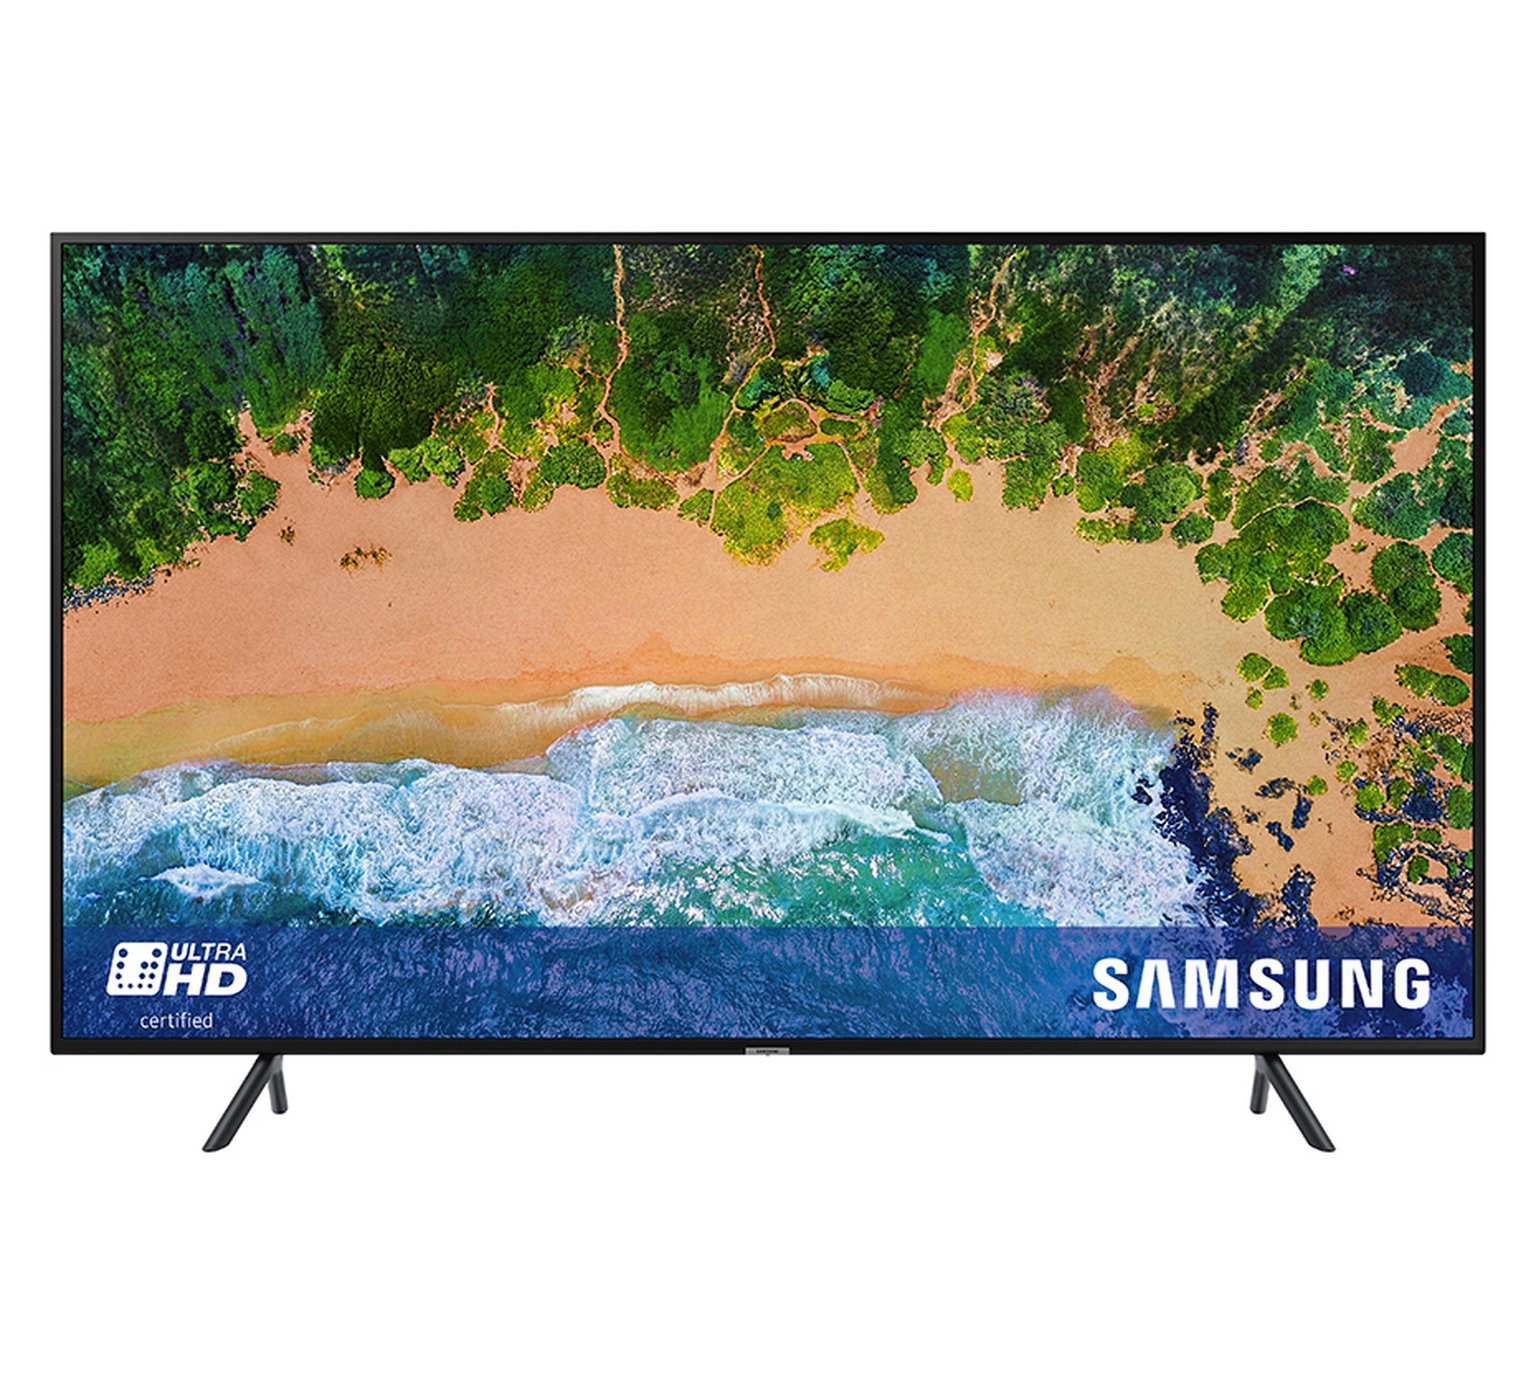 Samsung 40NU7120 40 Inch 4K UHD Smart TV with HDR